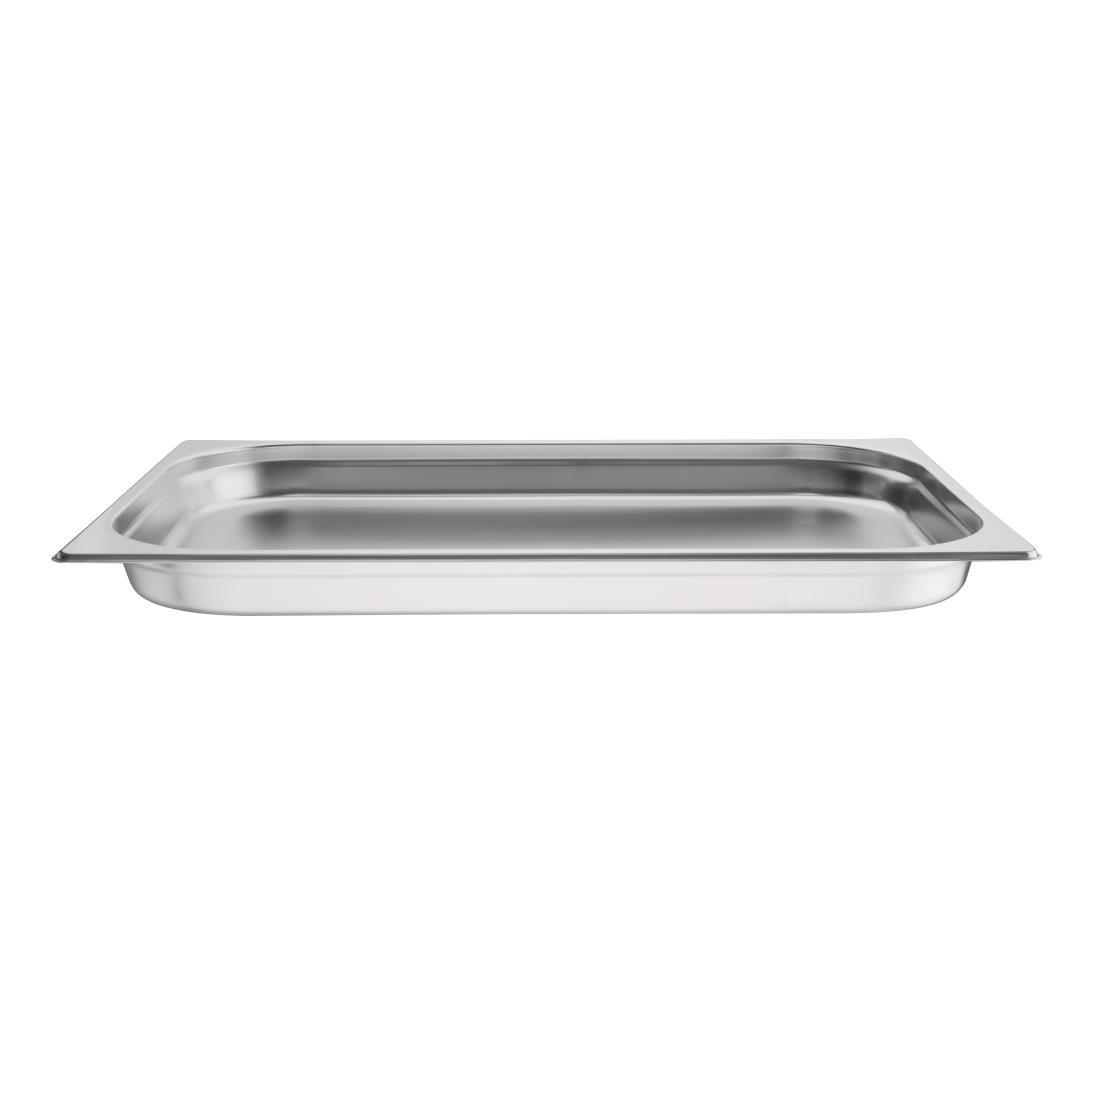 Vogue Stainless Steel 1/1 Gastronorm Pan 40mm - K994  - 2